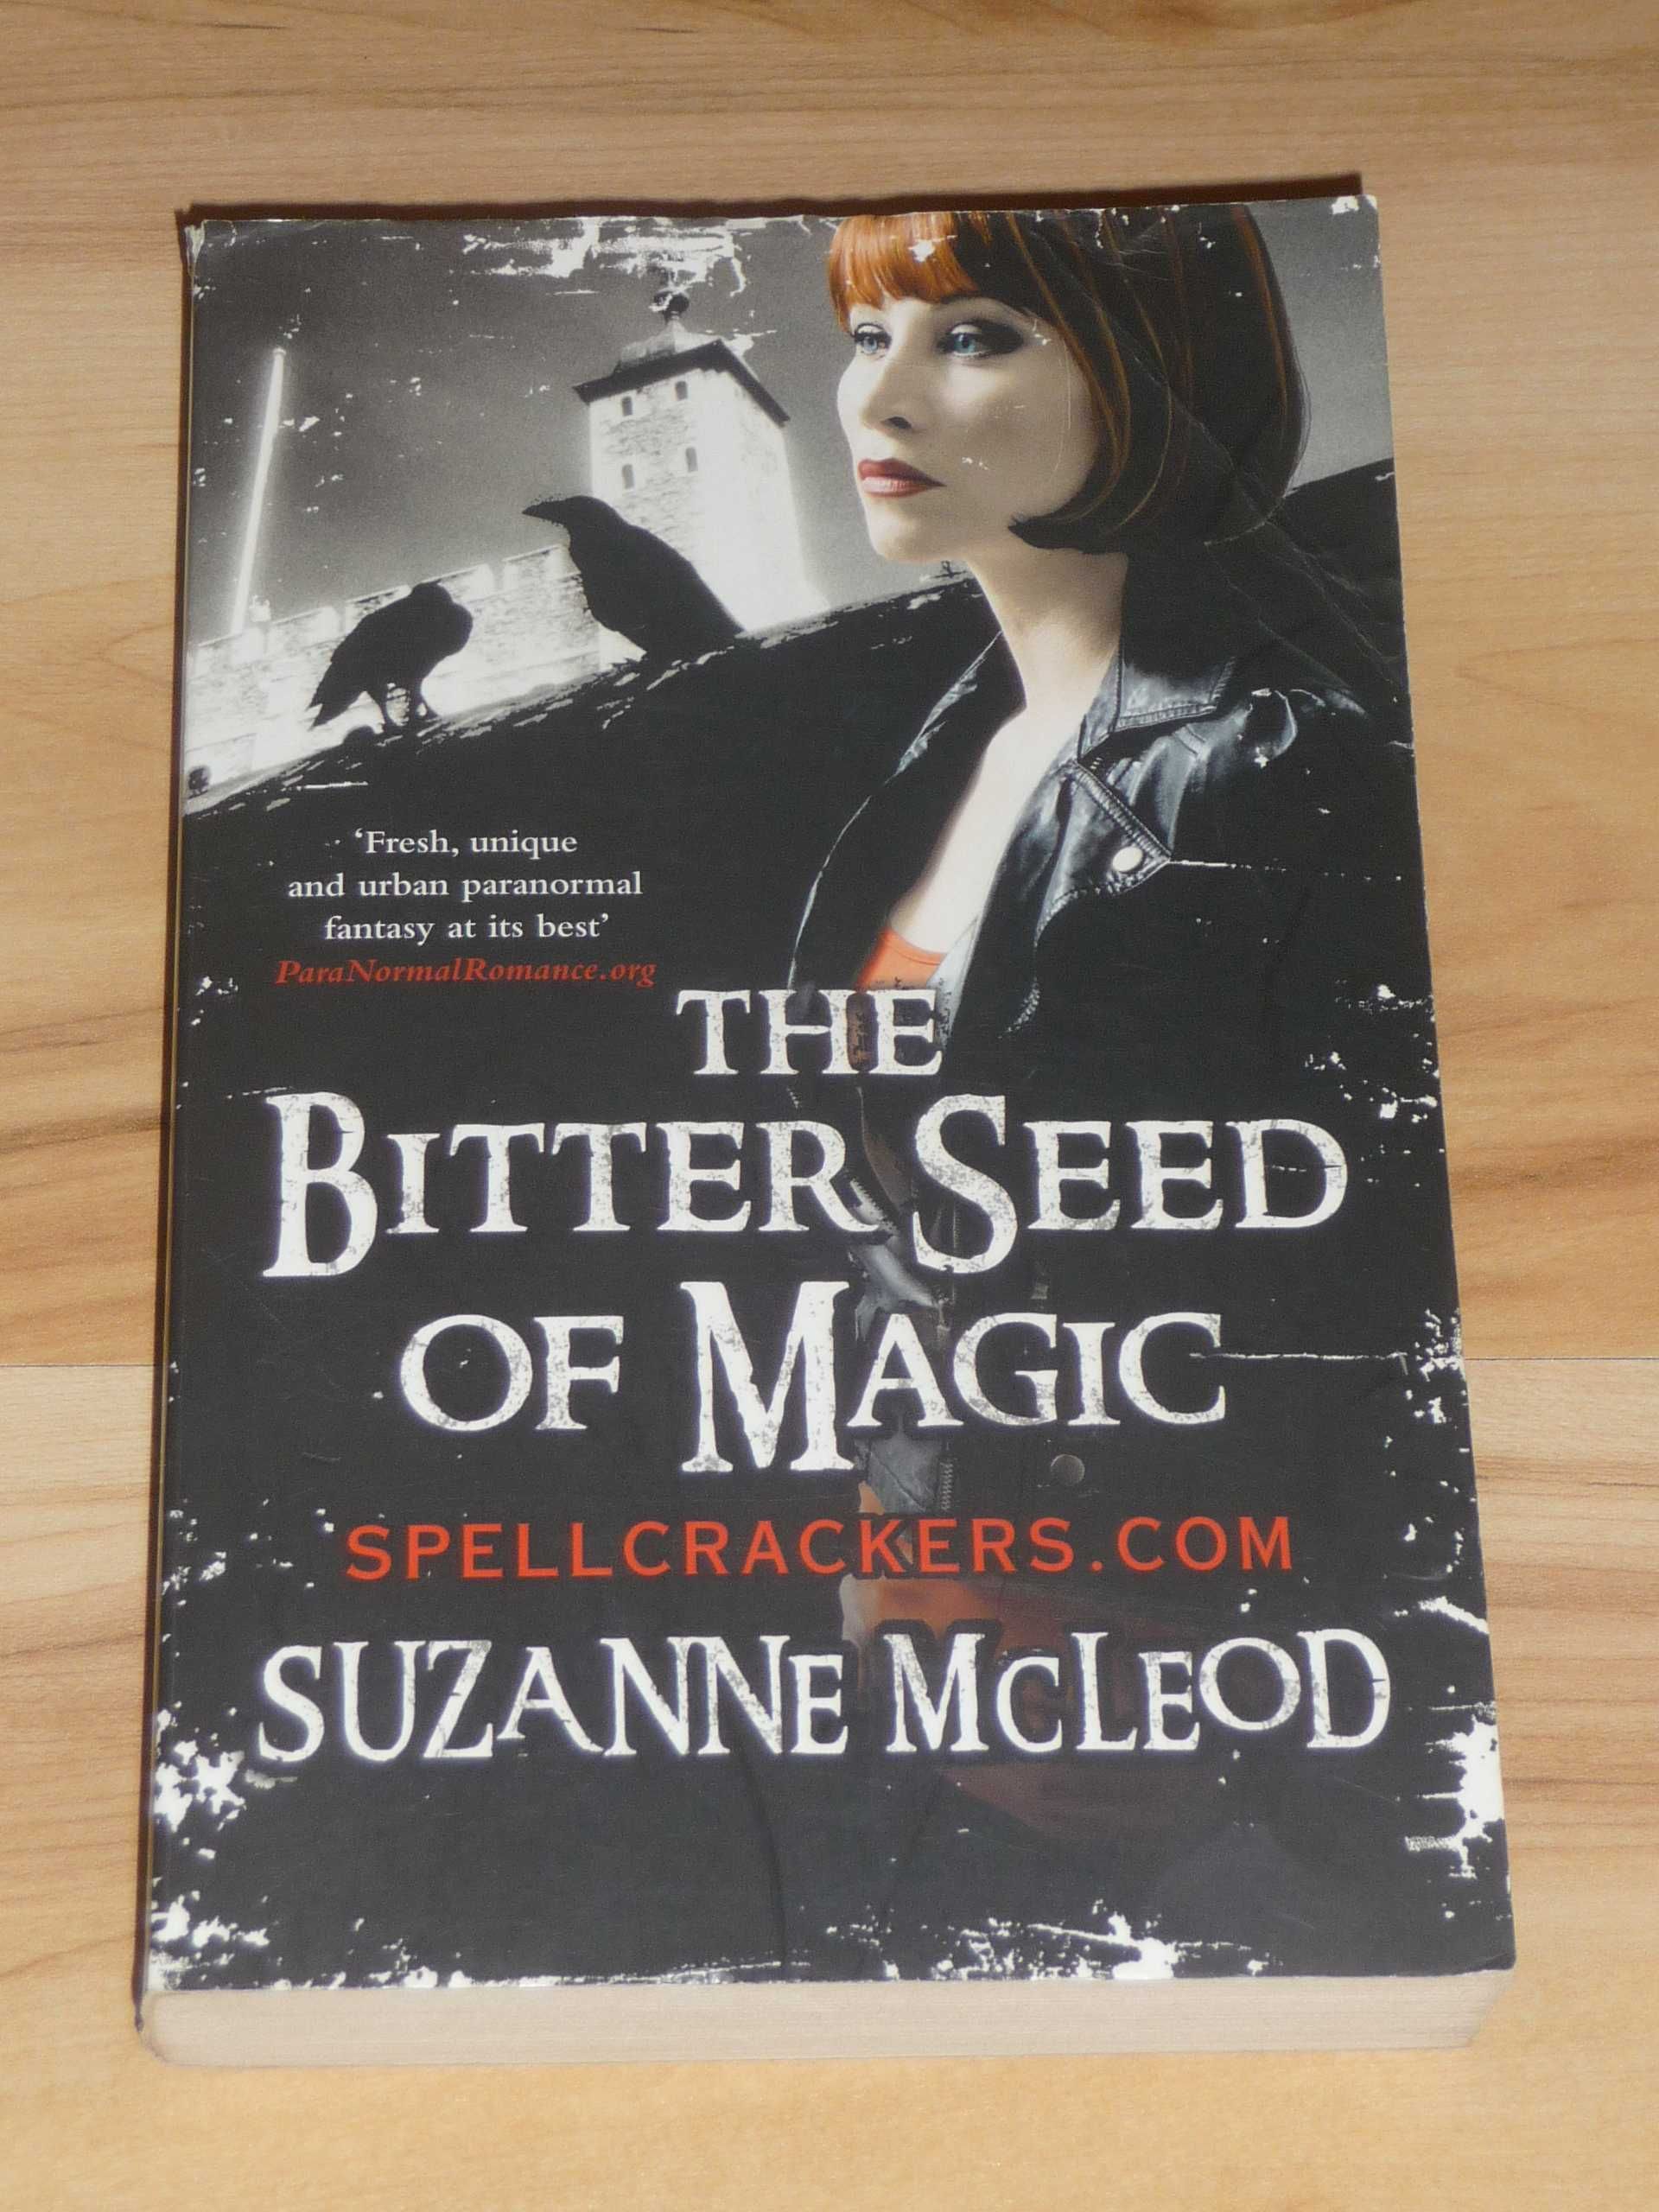 Suzanne McLeod - The Bitter Seed Of Magic